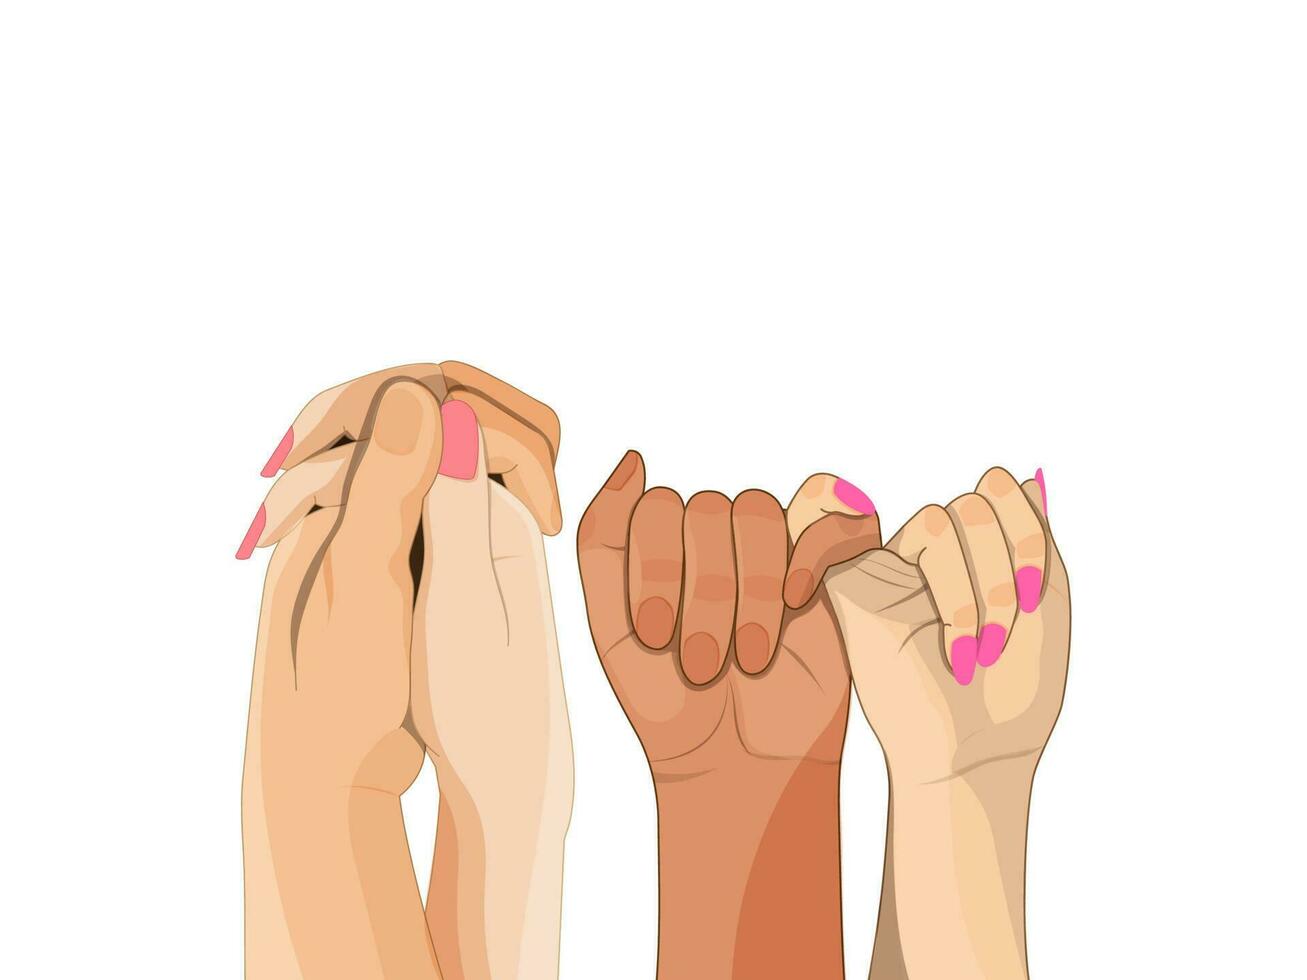 Couple Holding Hands Like As One Finger Hold And Intertwined Finger On White Background. vector